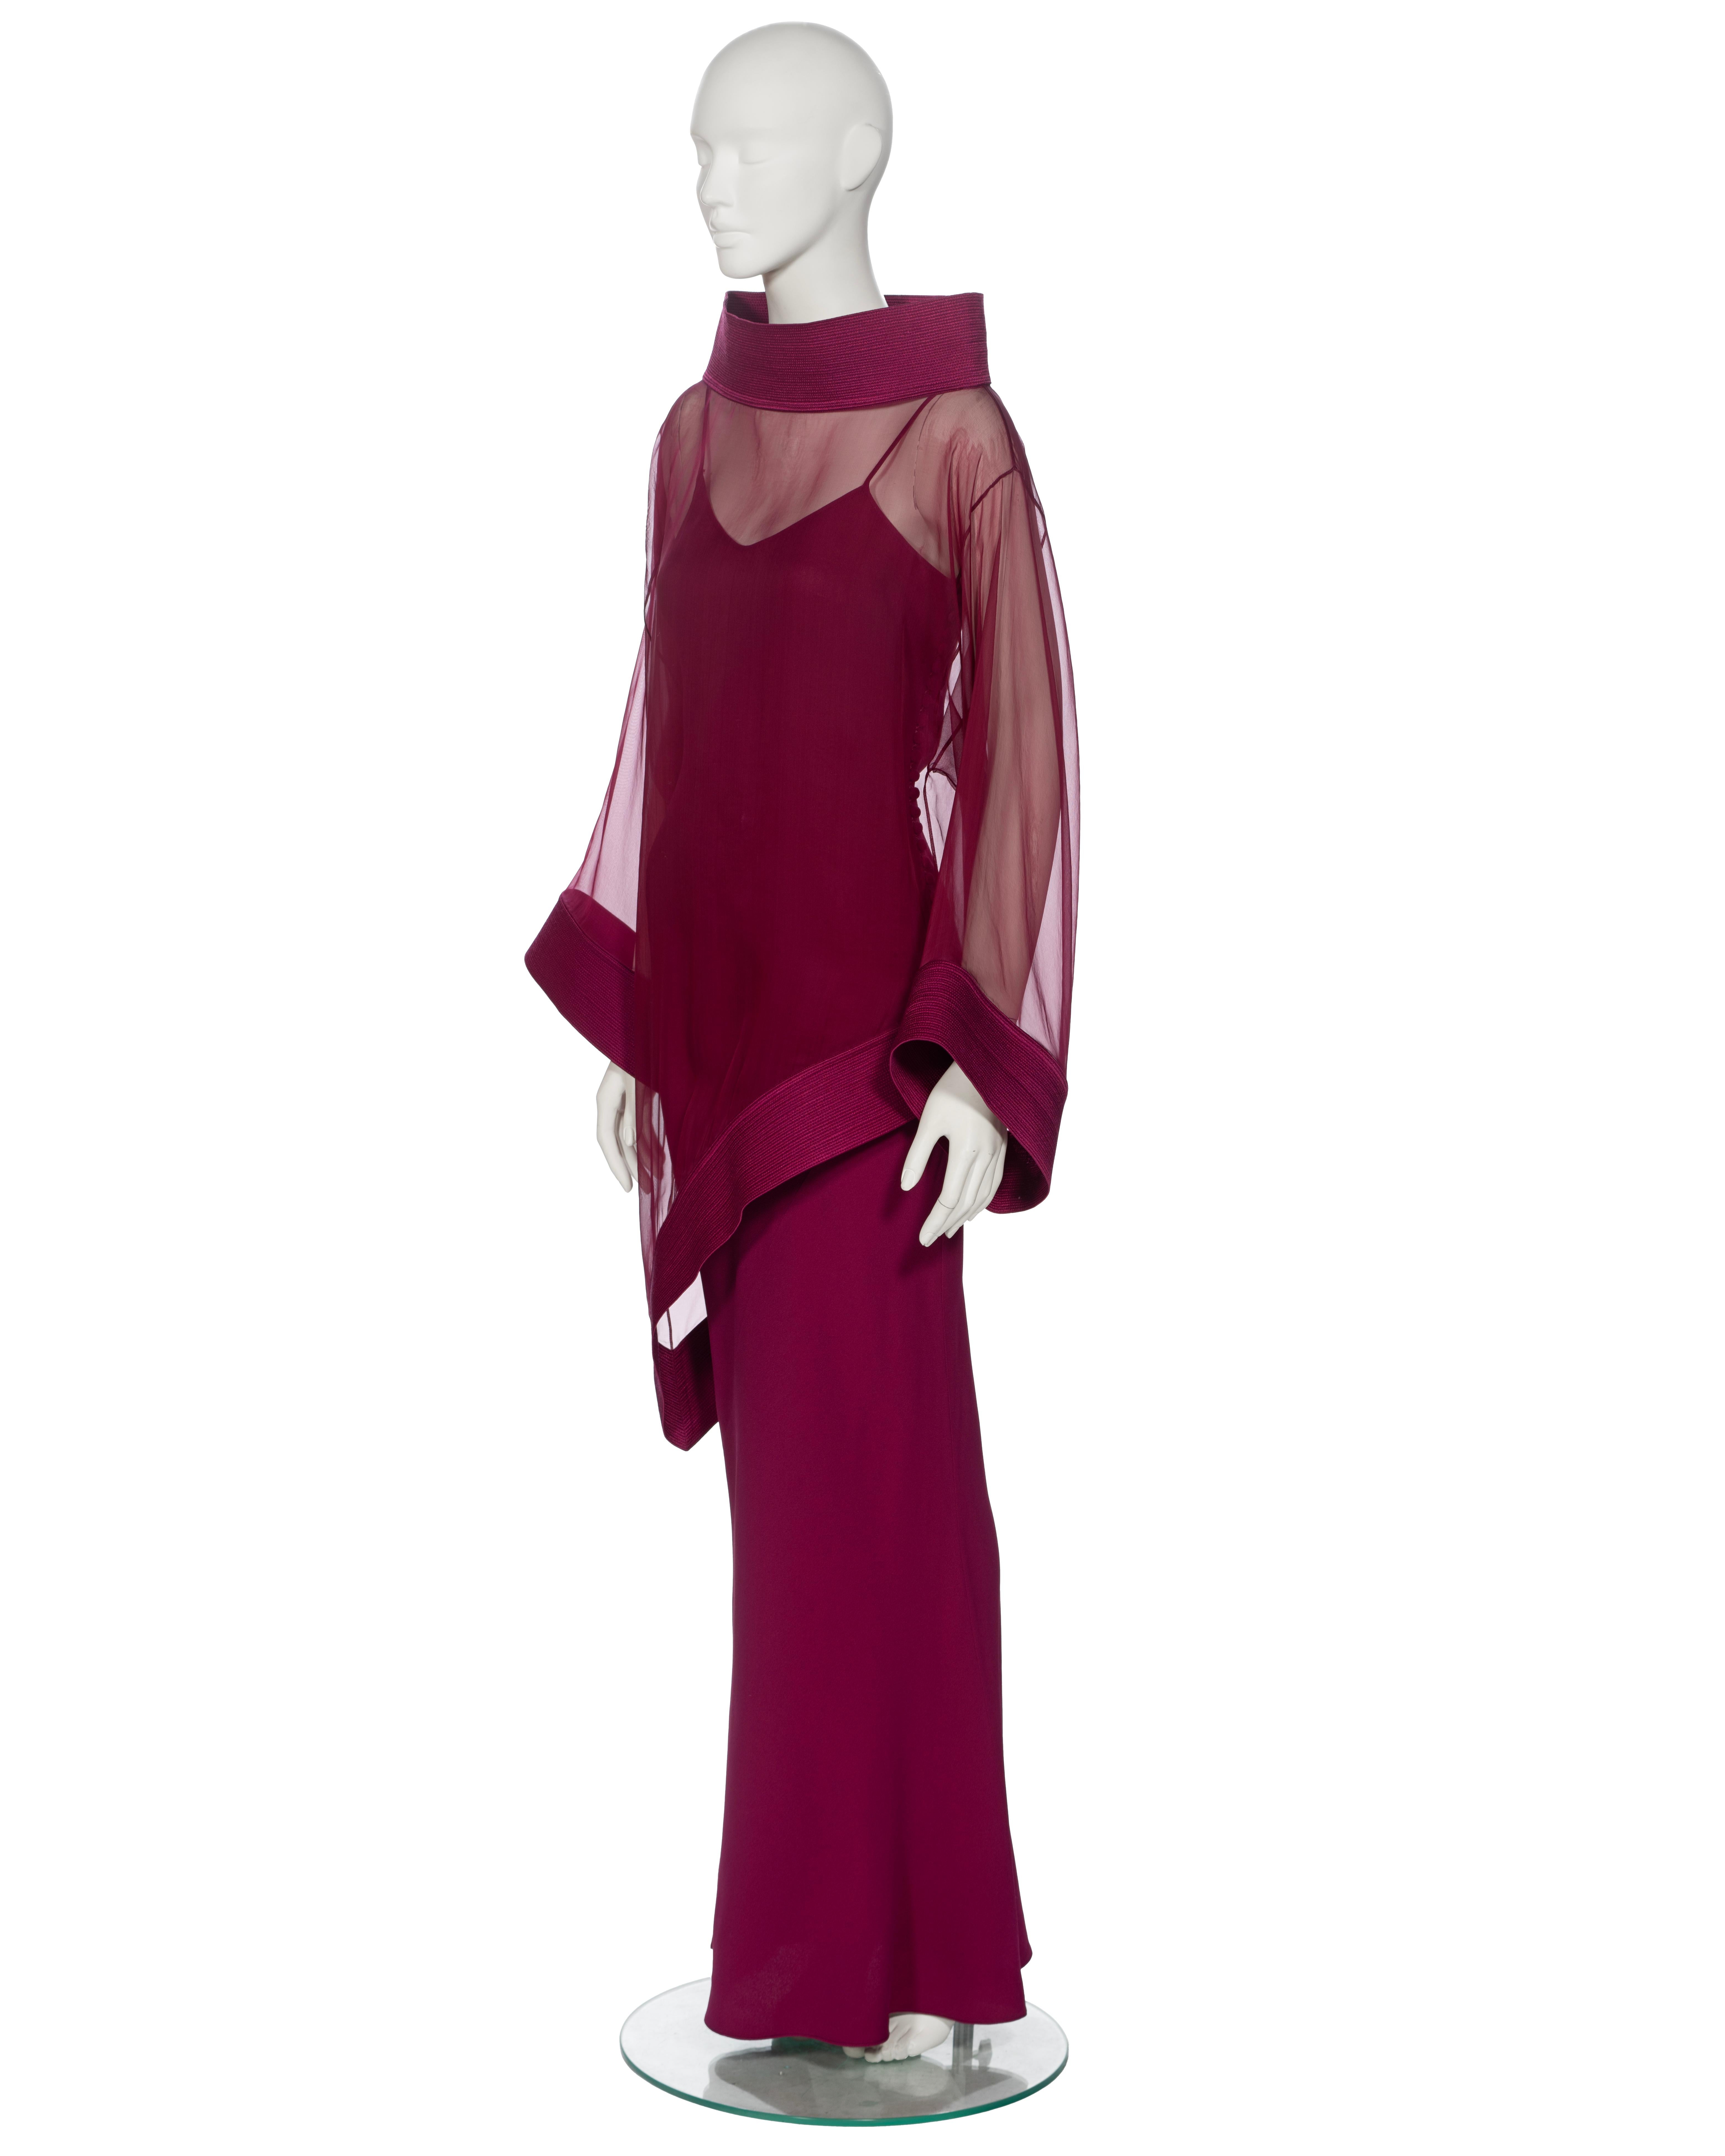 Christian Dior by John Galliano Claret Evening Dress and Tunic Ensemble, fw 1999 For Sale 4